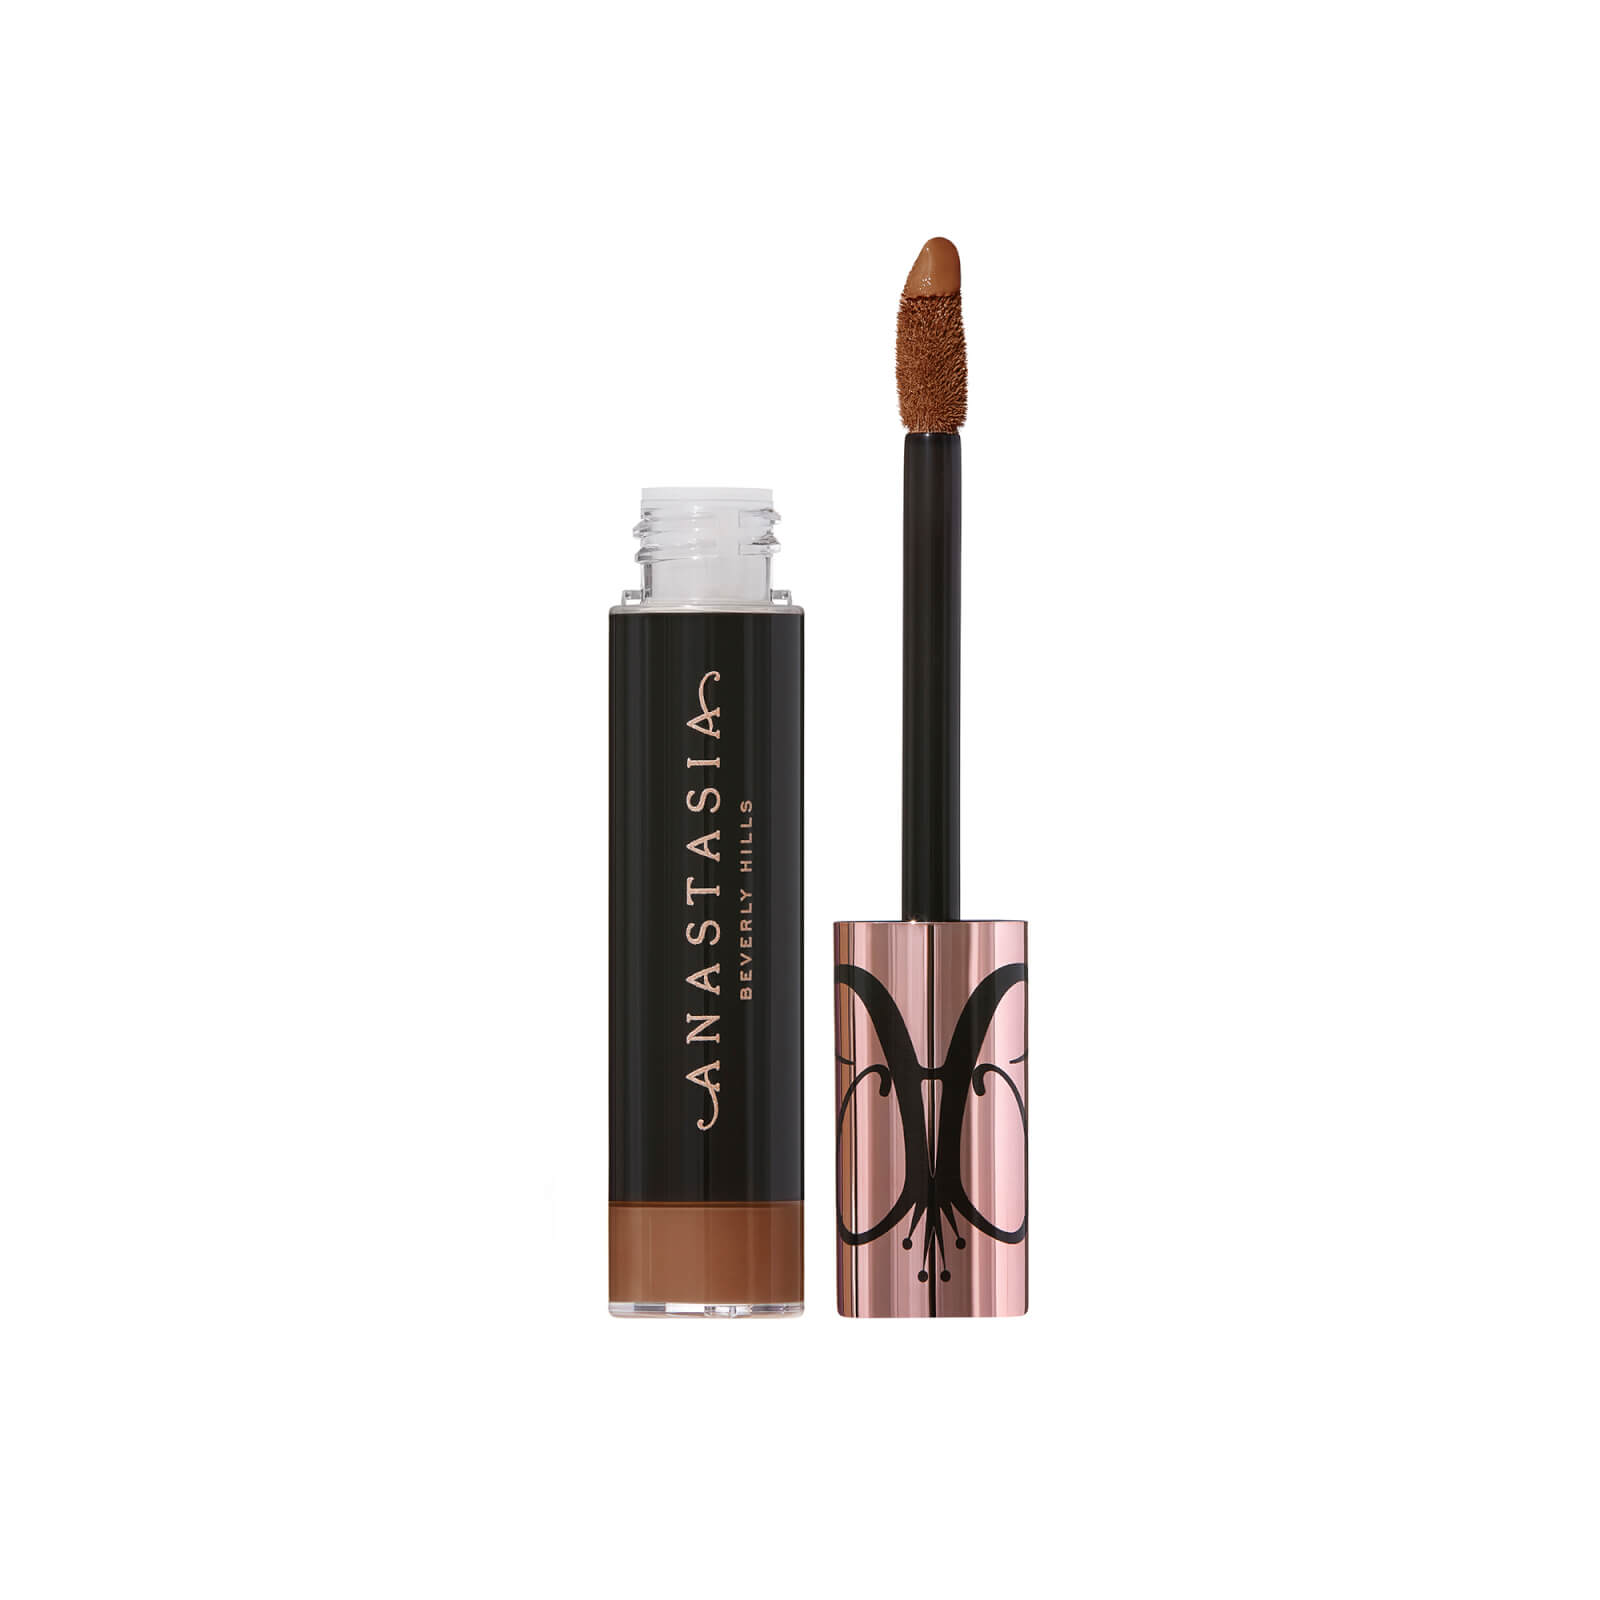 Anastasia Beverly Hills Magic Touch Concealer 12ml (Various Shades) - 24